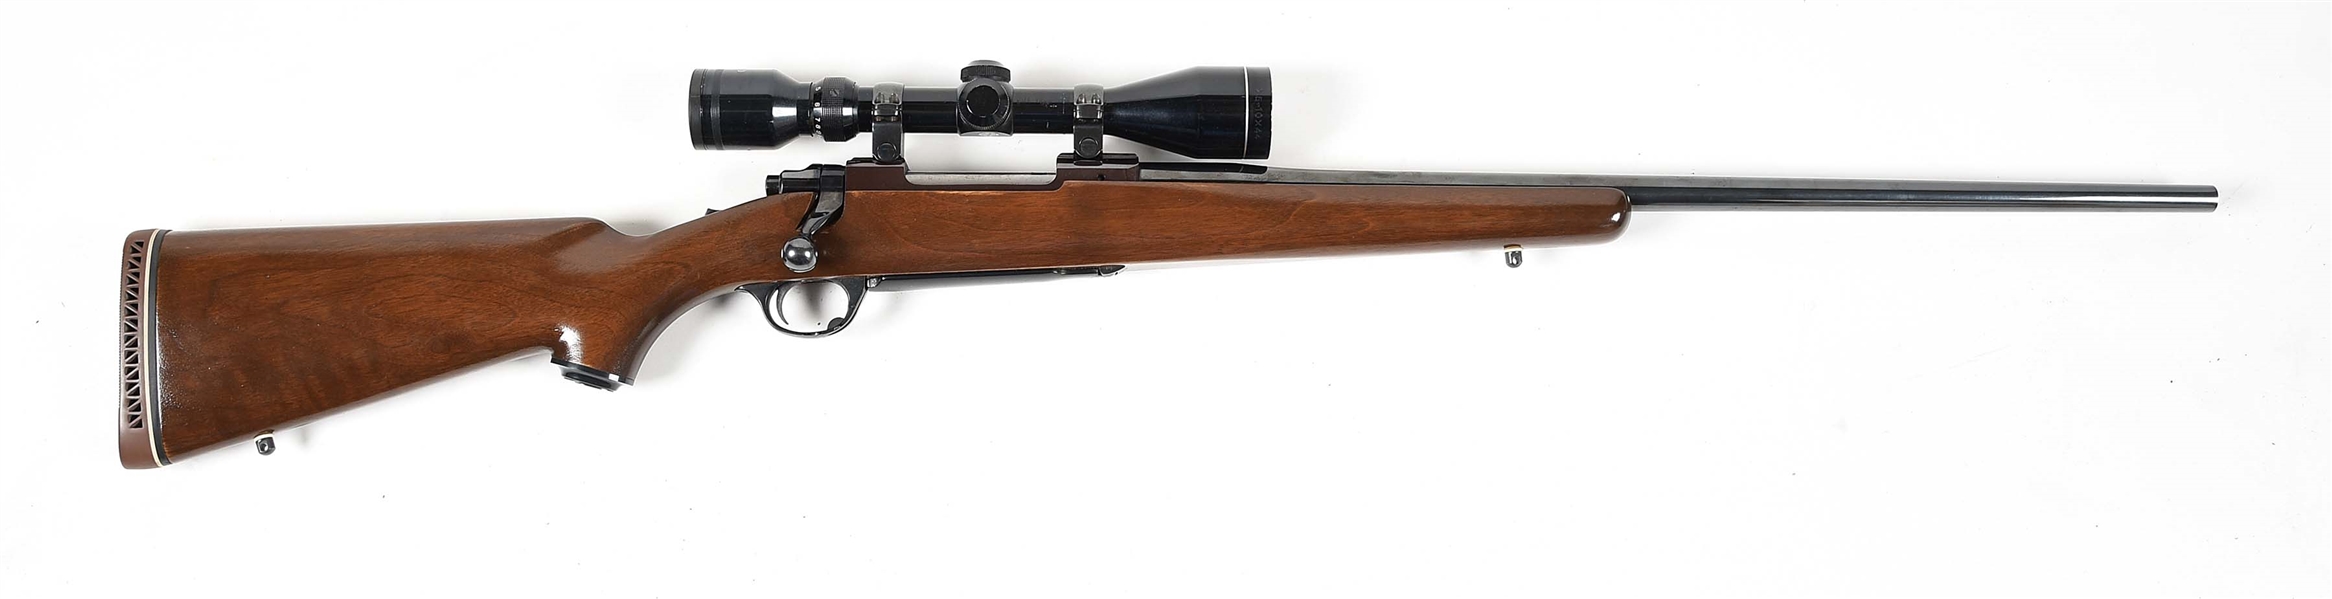 (M) RUGER M77 .338 WIN. MAG. BOLT ACTION RIFLE WITH SCOPE.